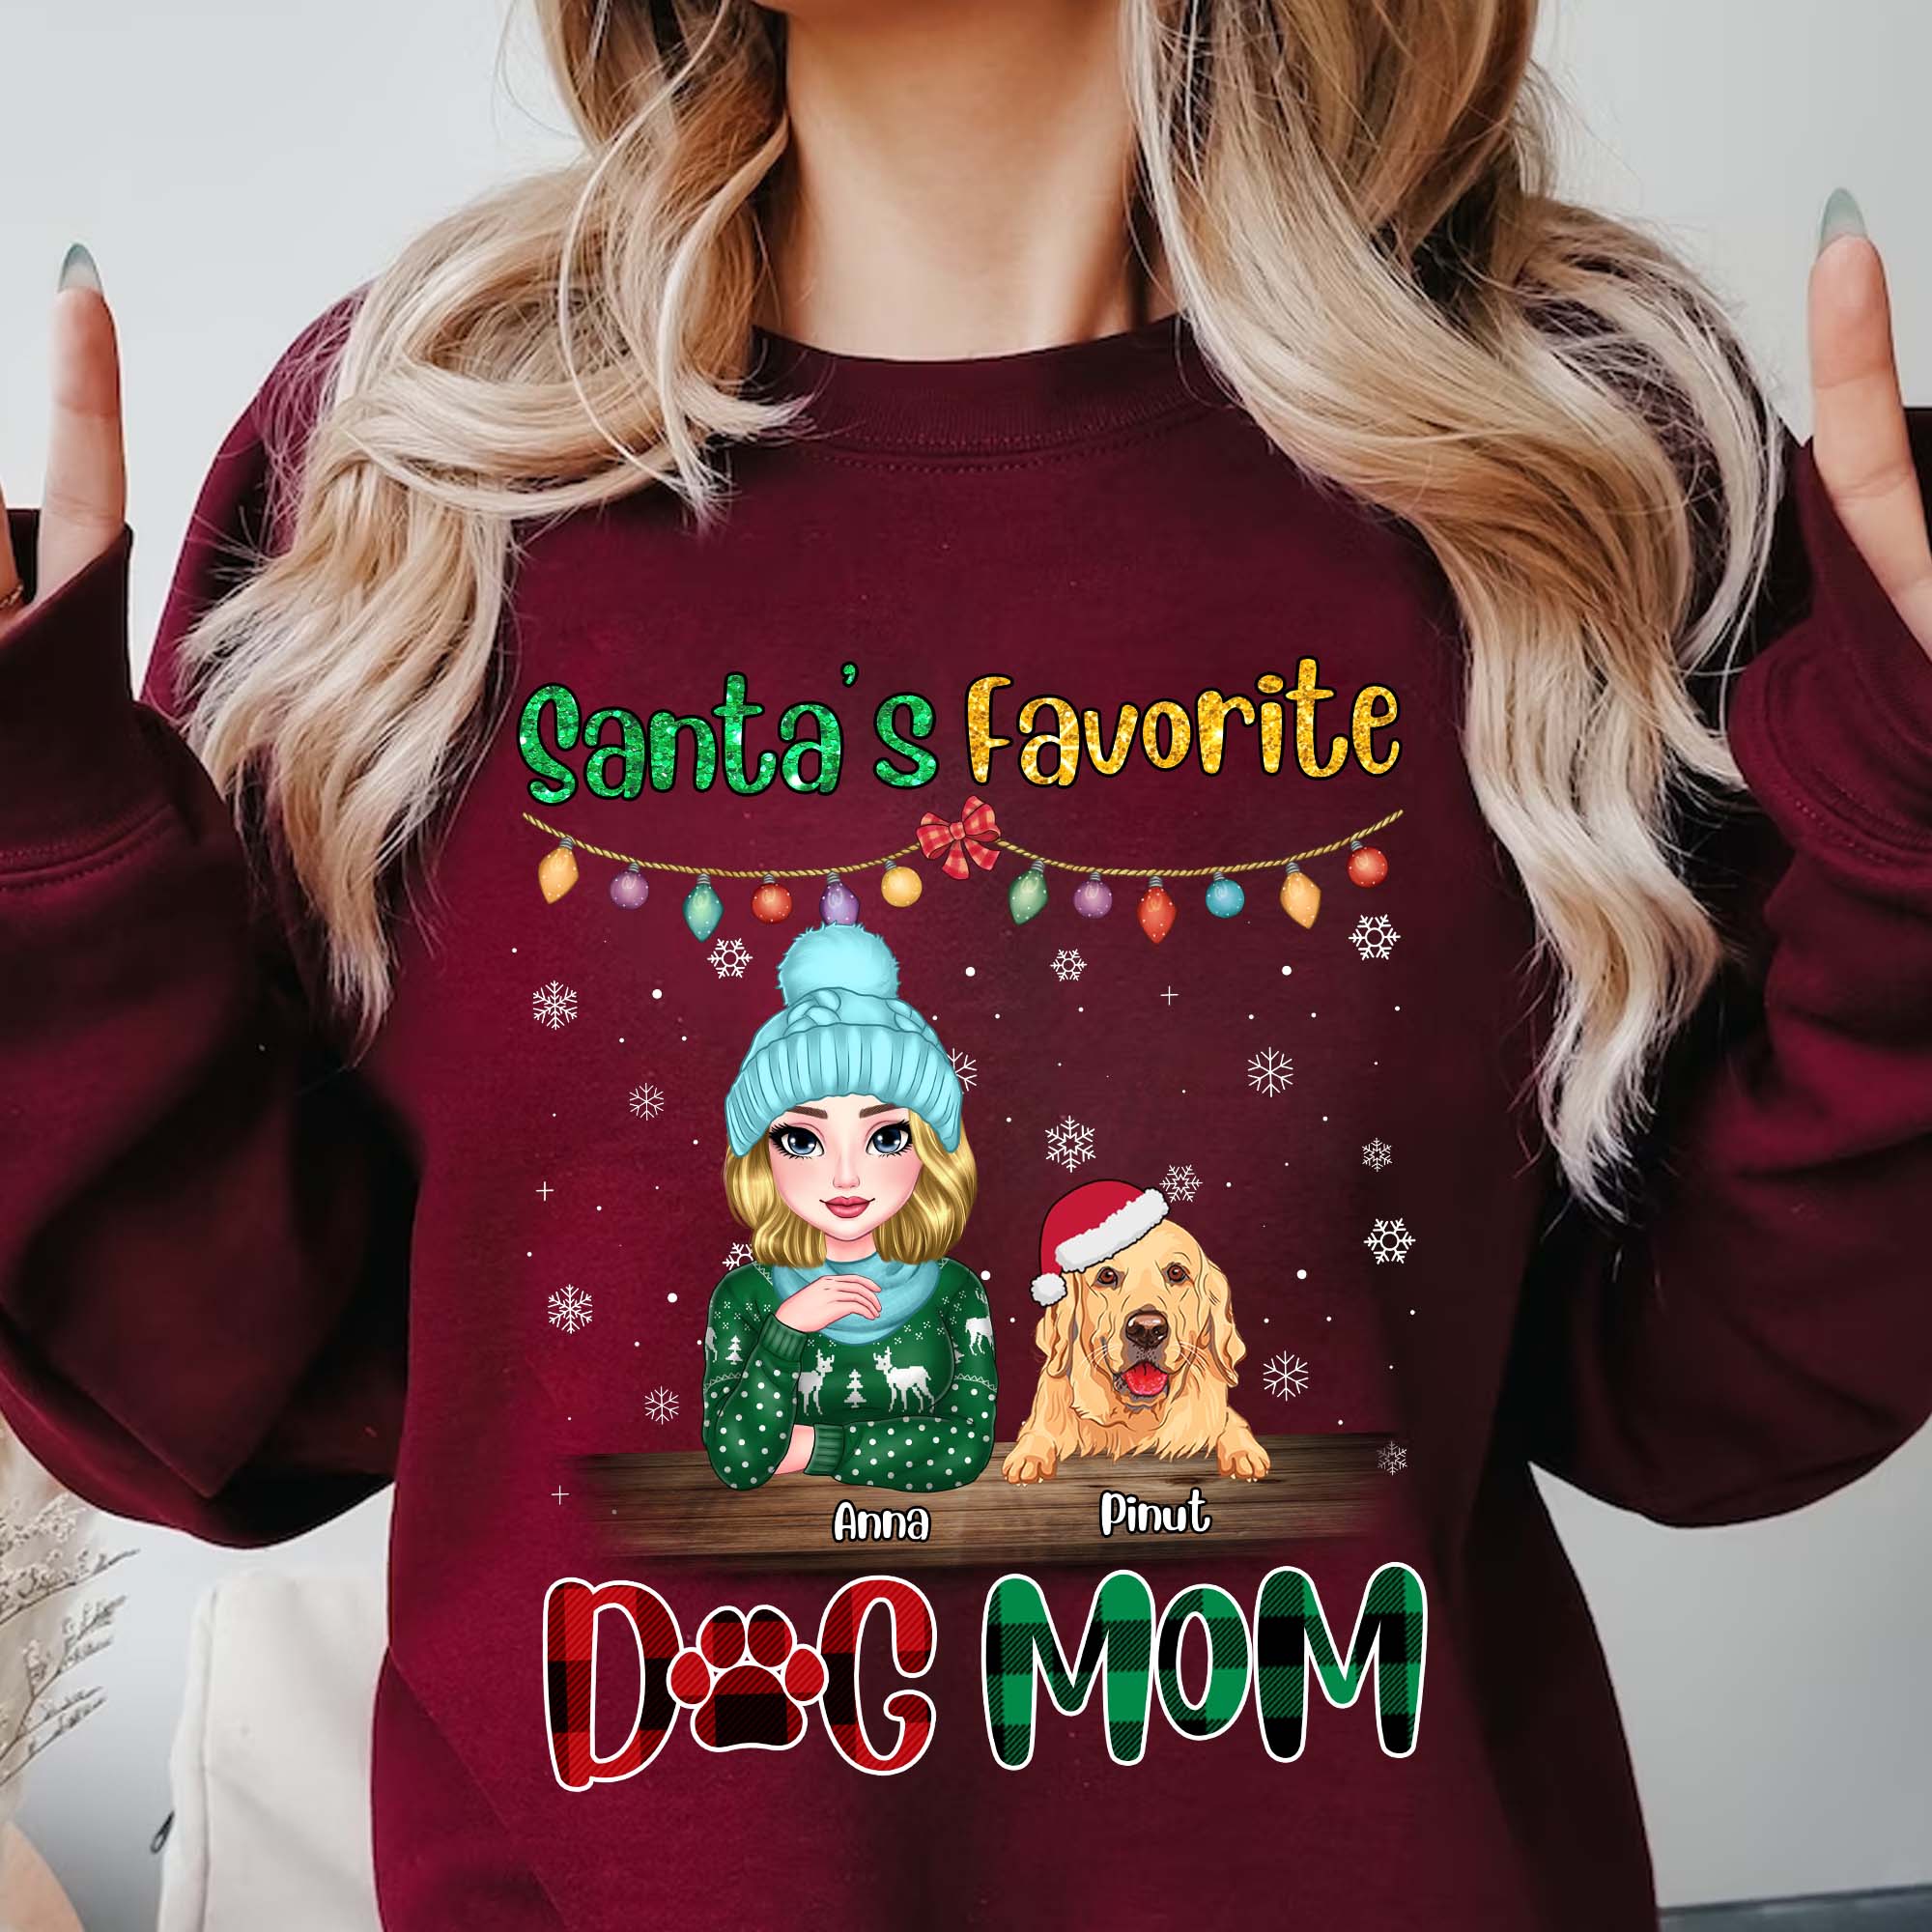 Santa's Favorite Dog Mom - Custom Appearance And Name, Personalized Sweatshirt - Family Gift, Gift For Pet Lover, Xmas Gift